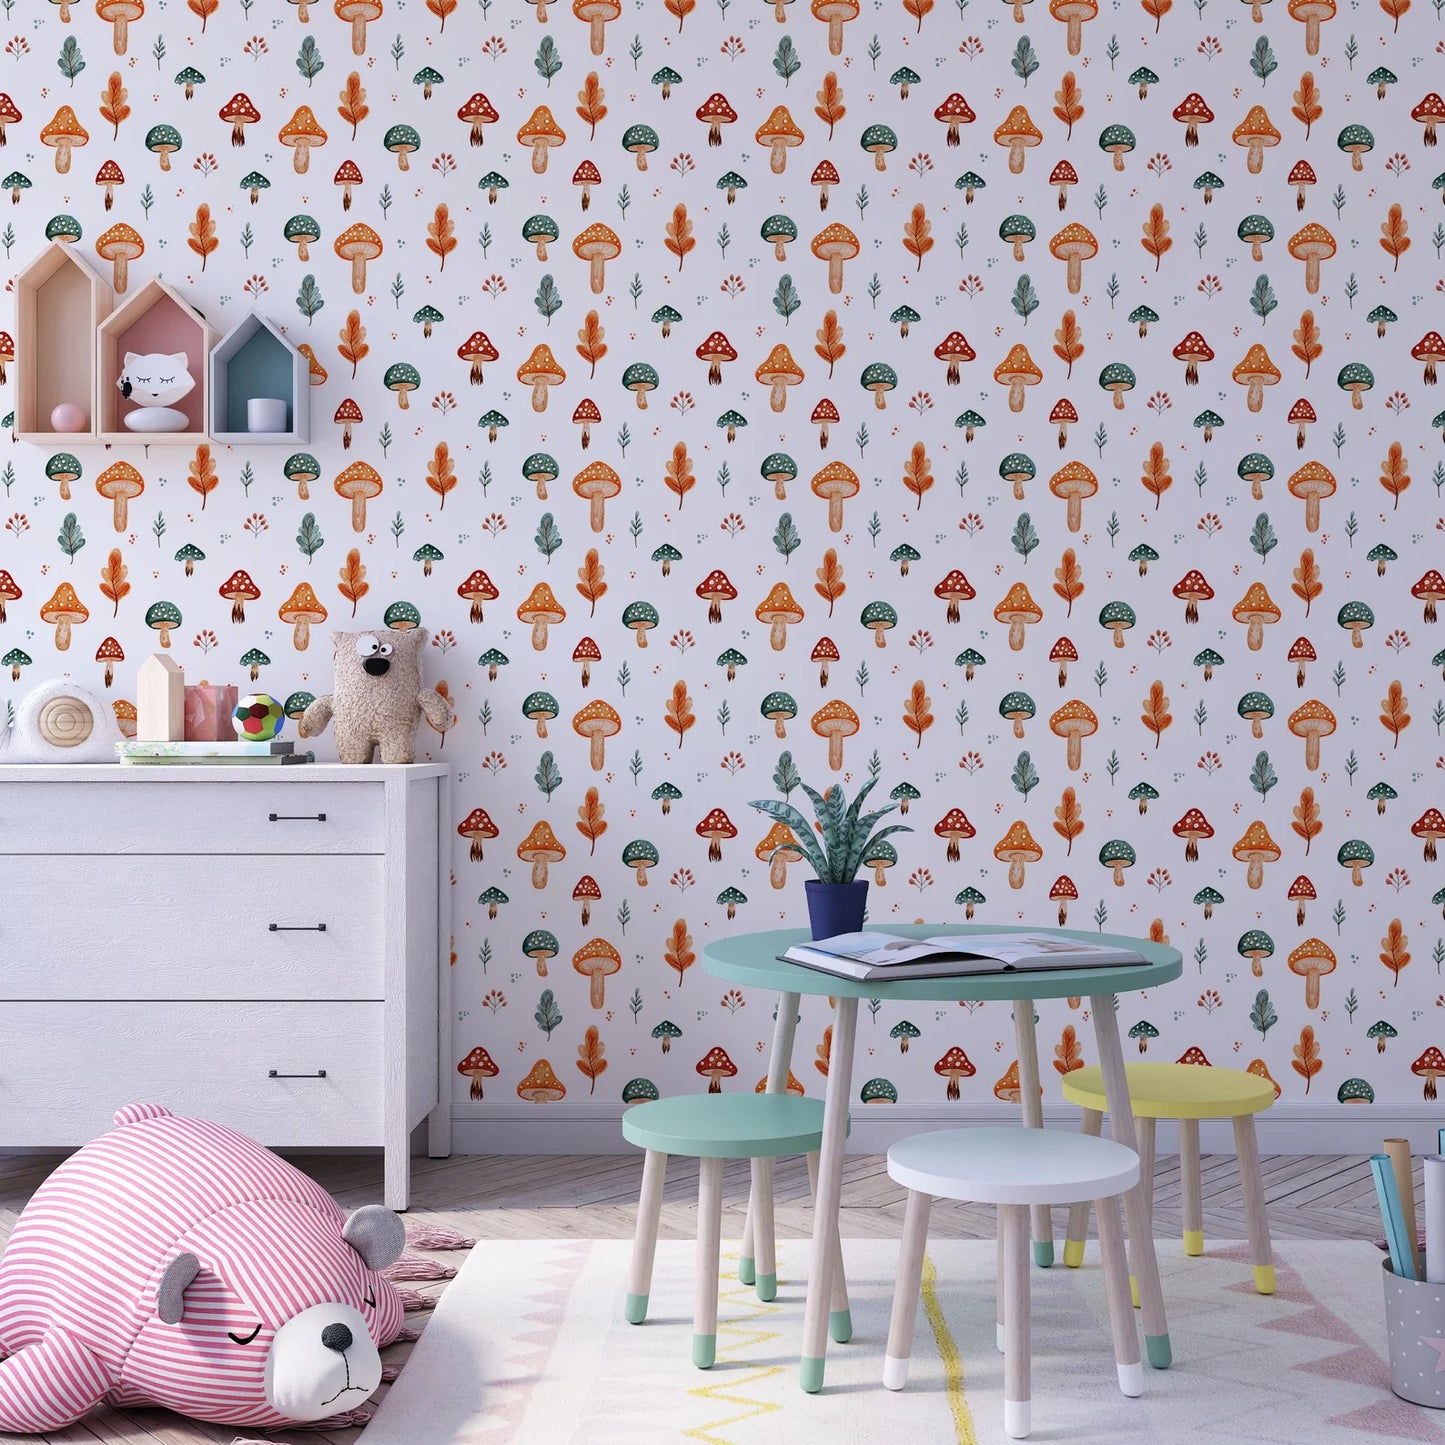 Charming mushroom wallpaper enhances the nursery with adorable and whimsical design